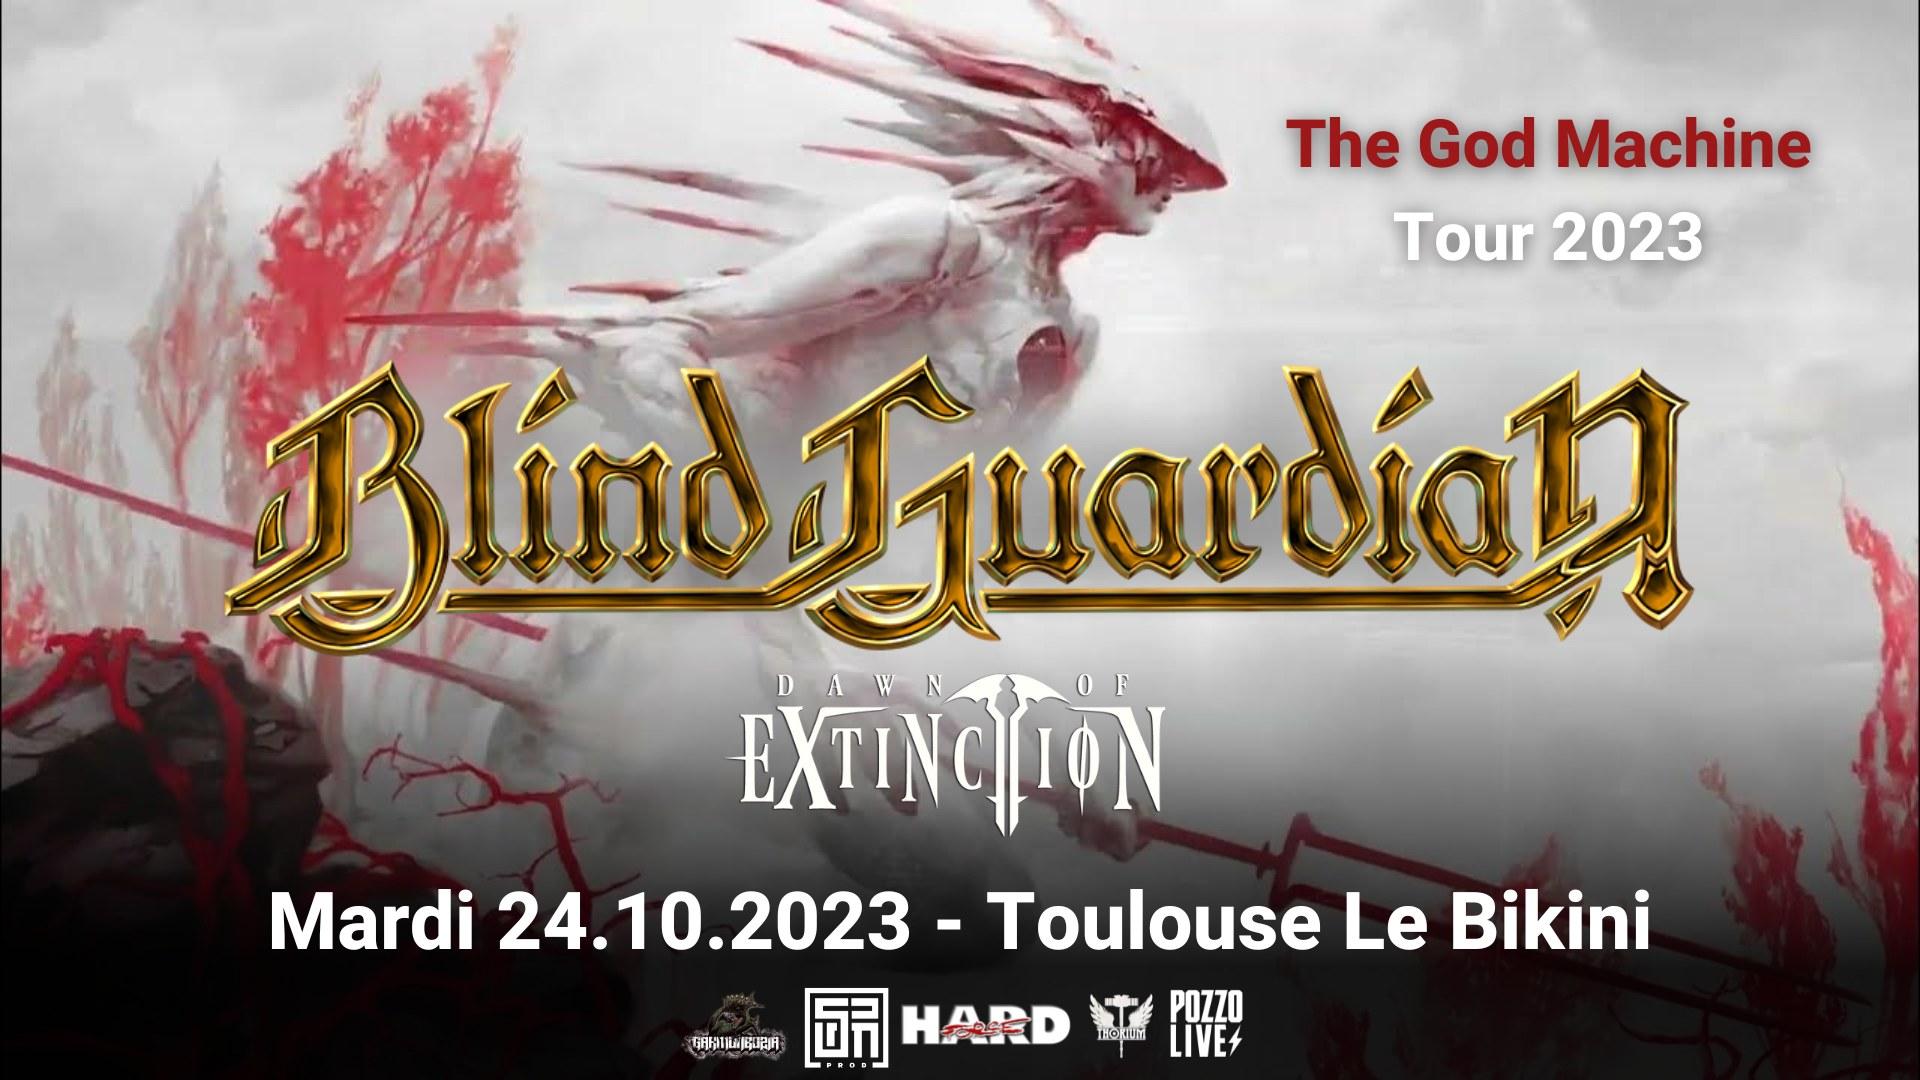 Blind guardian toulouse 2023